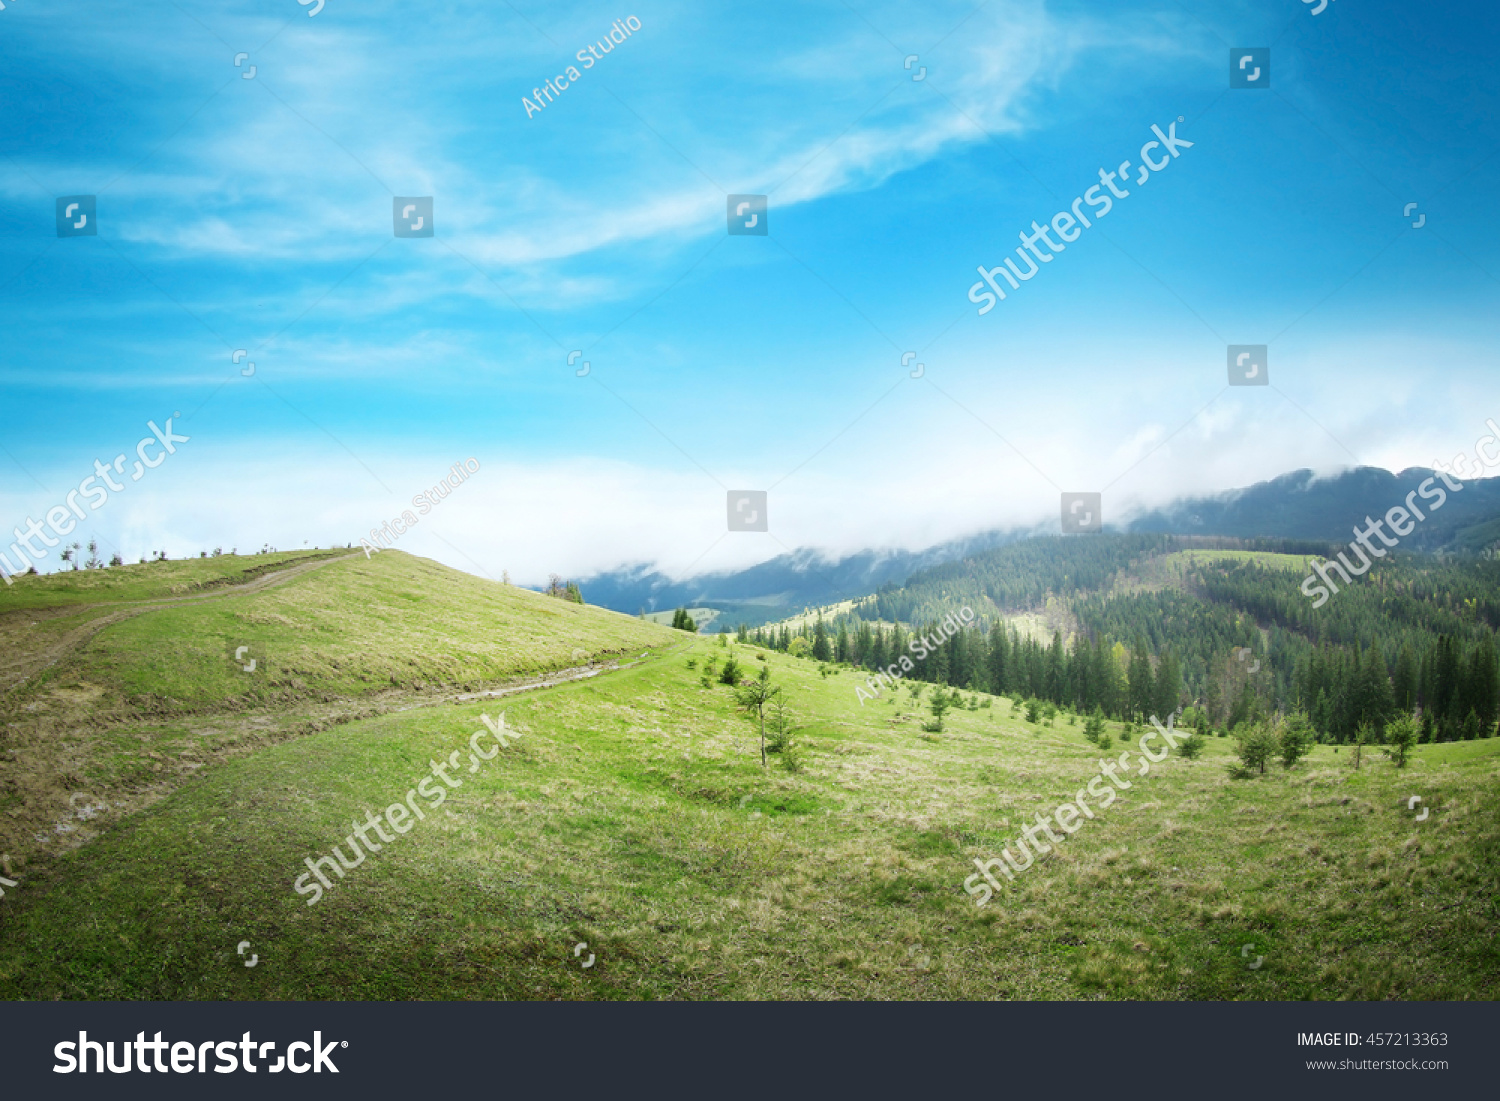 Summer forest on mountain slopes #457213363